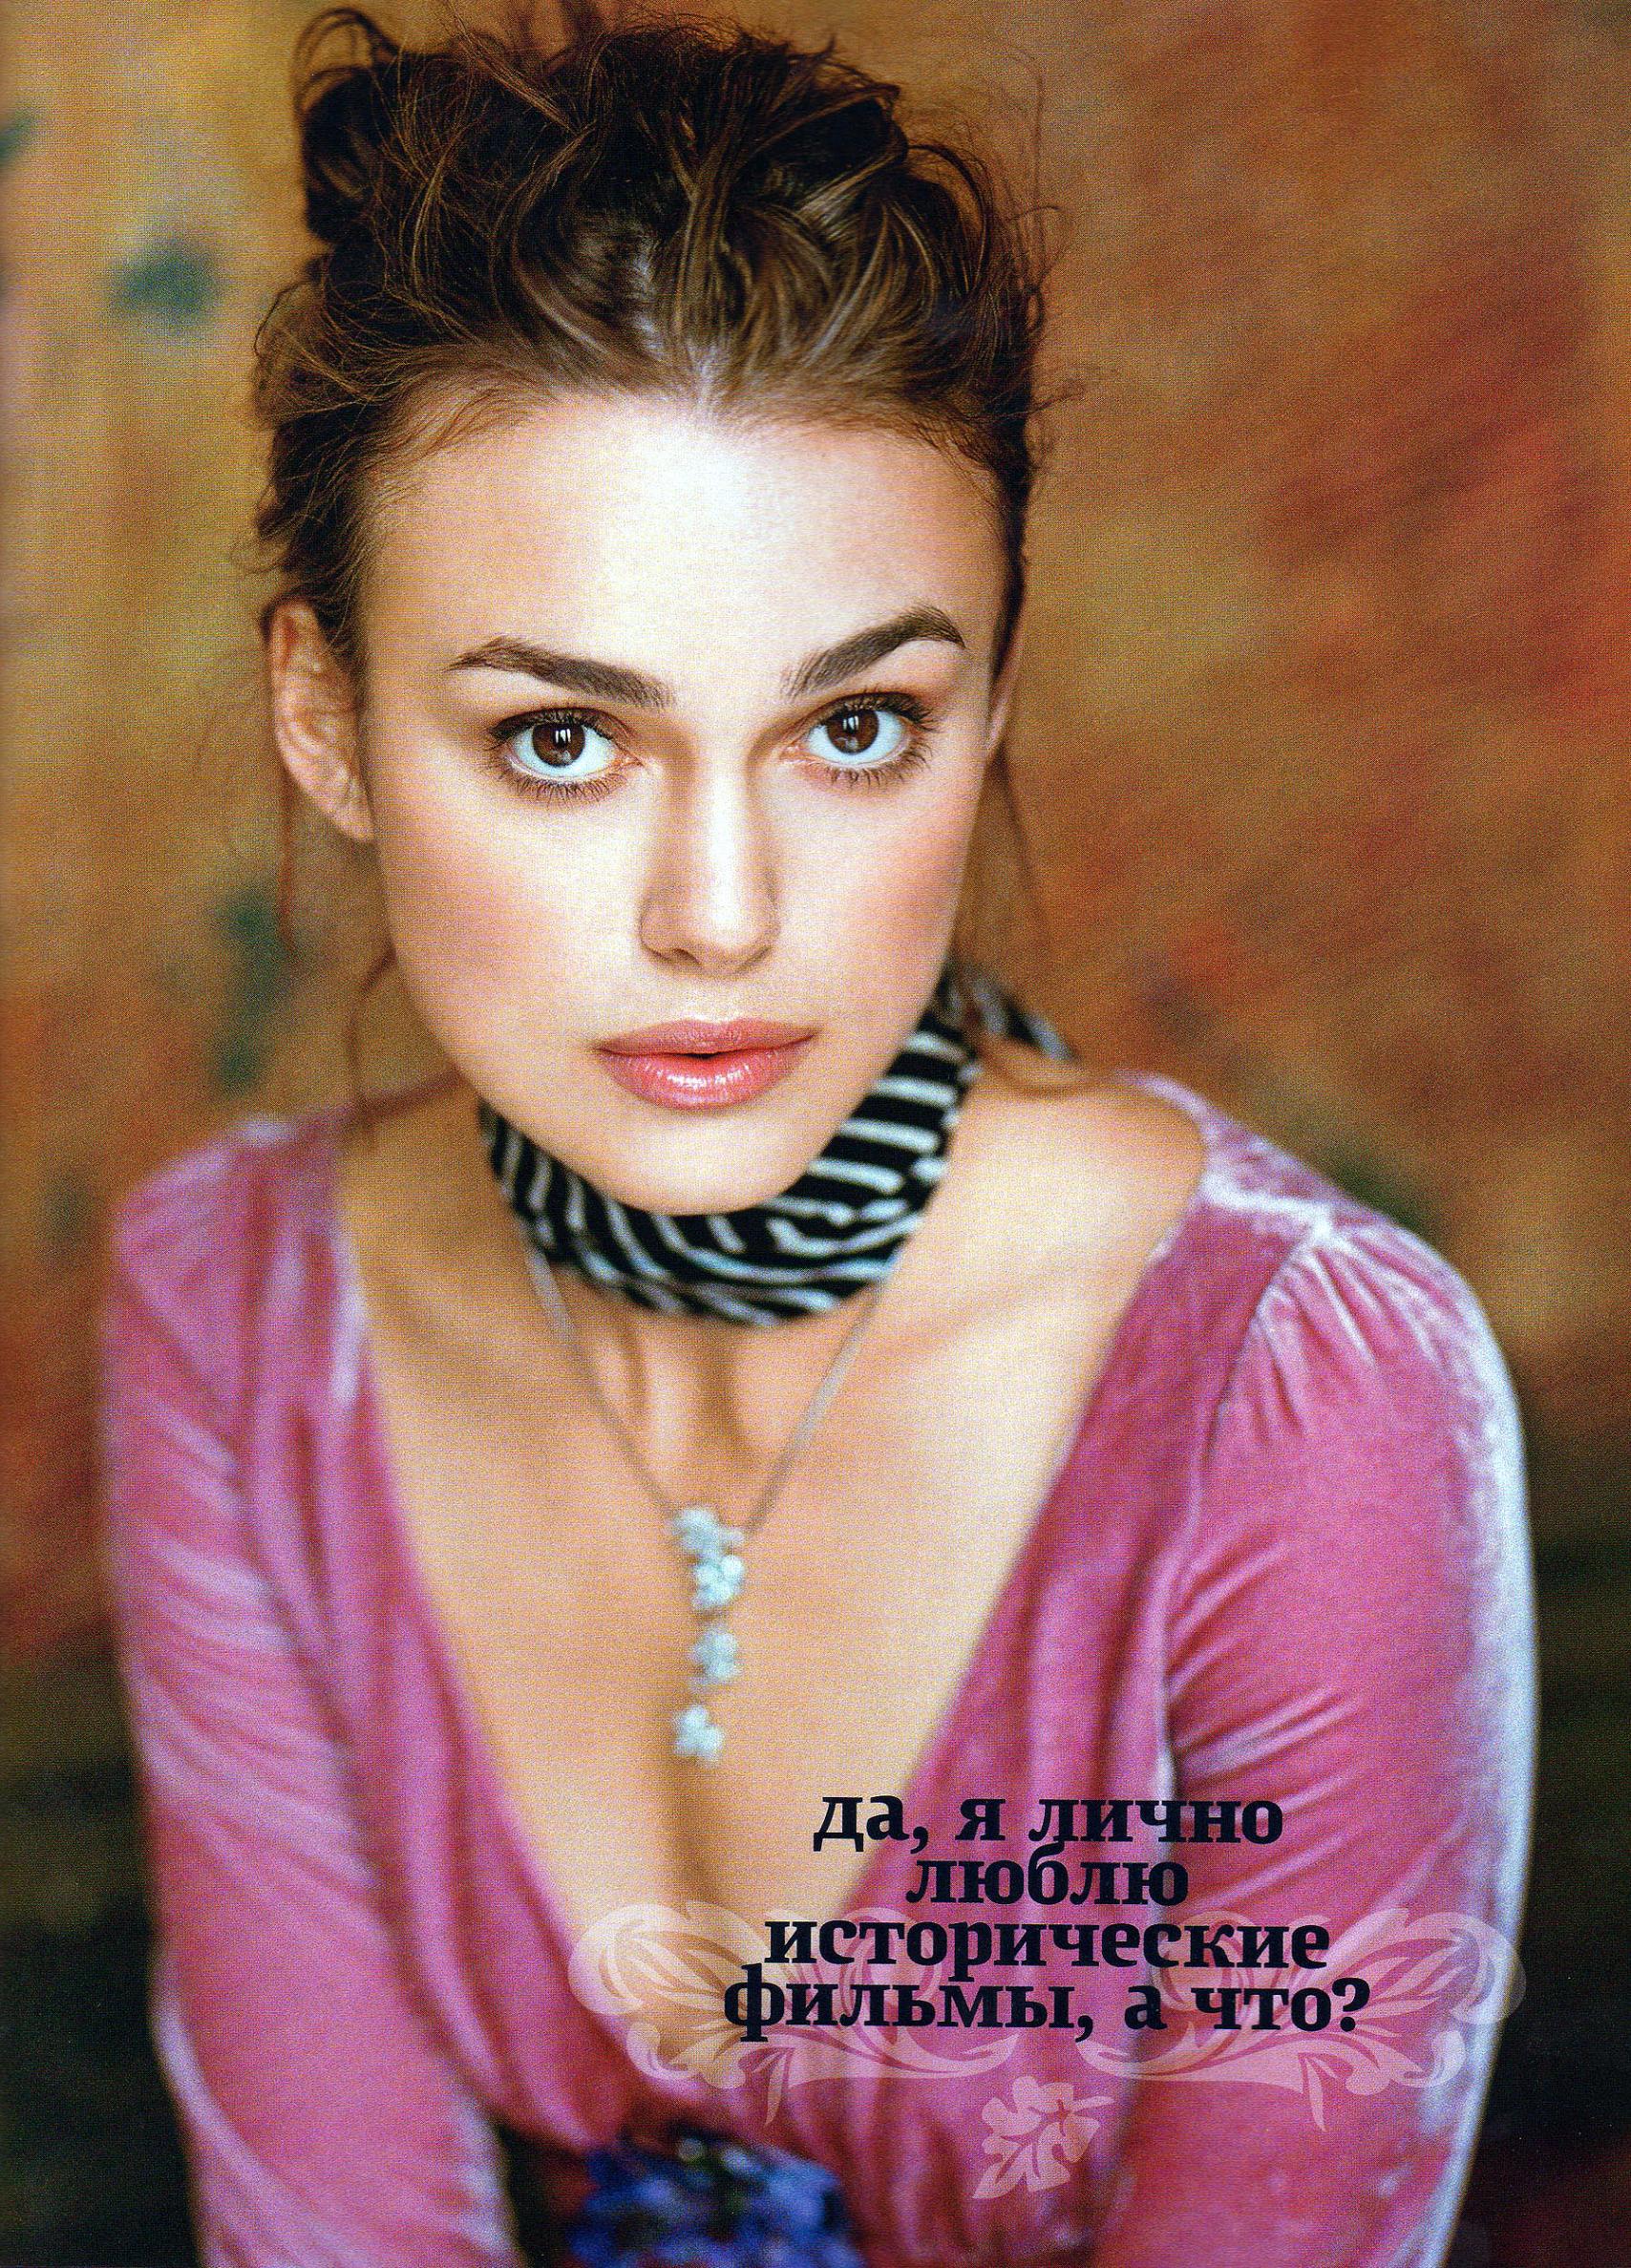 http://www.theplace.ru/archive/keira_knightley/img/48619_keira_empire_r.jpg